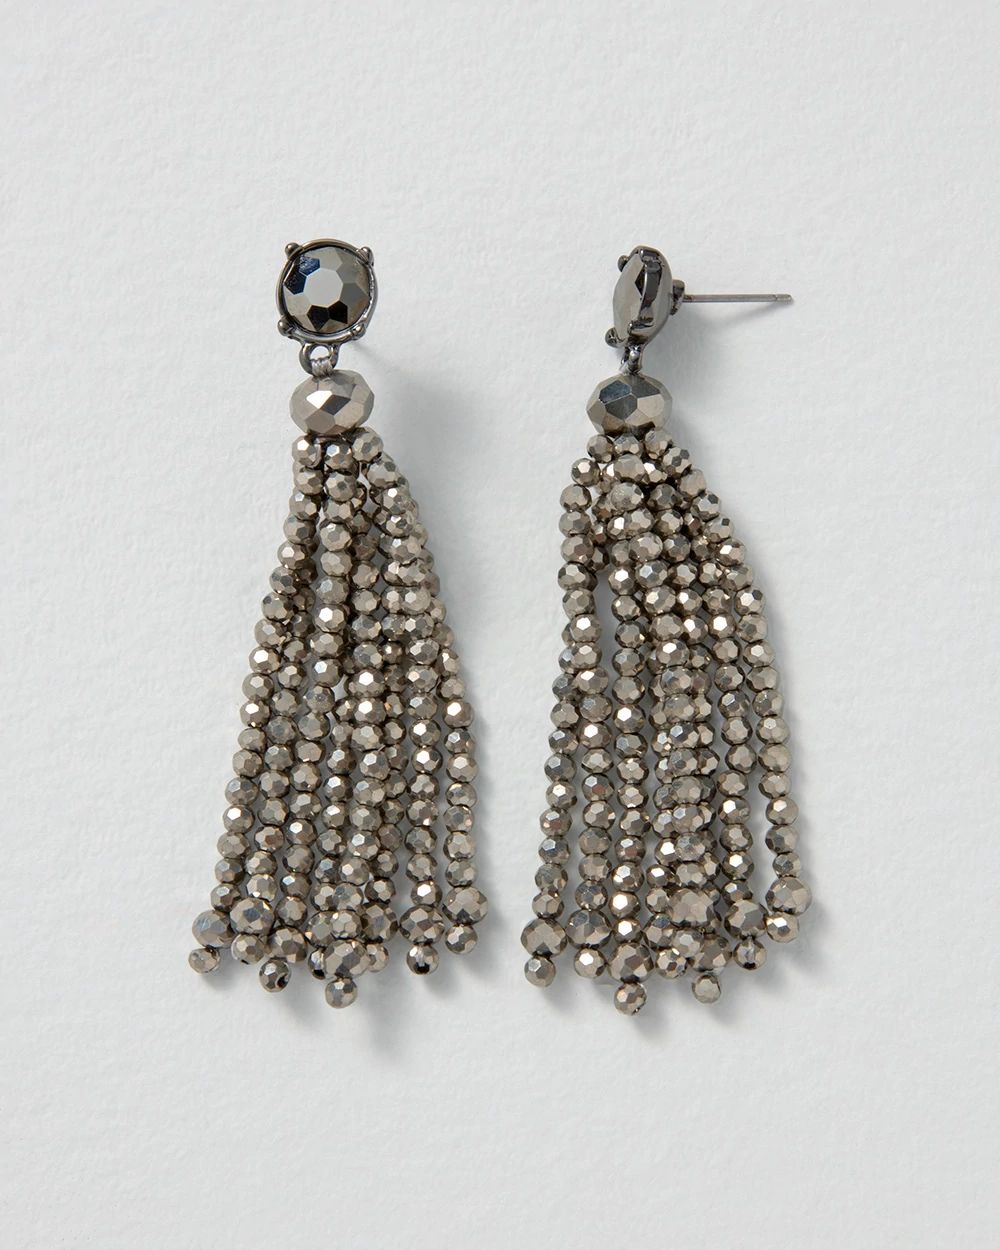 Hematite Beaded Tassel Earrings click to view larger image.